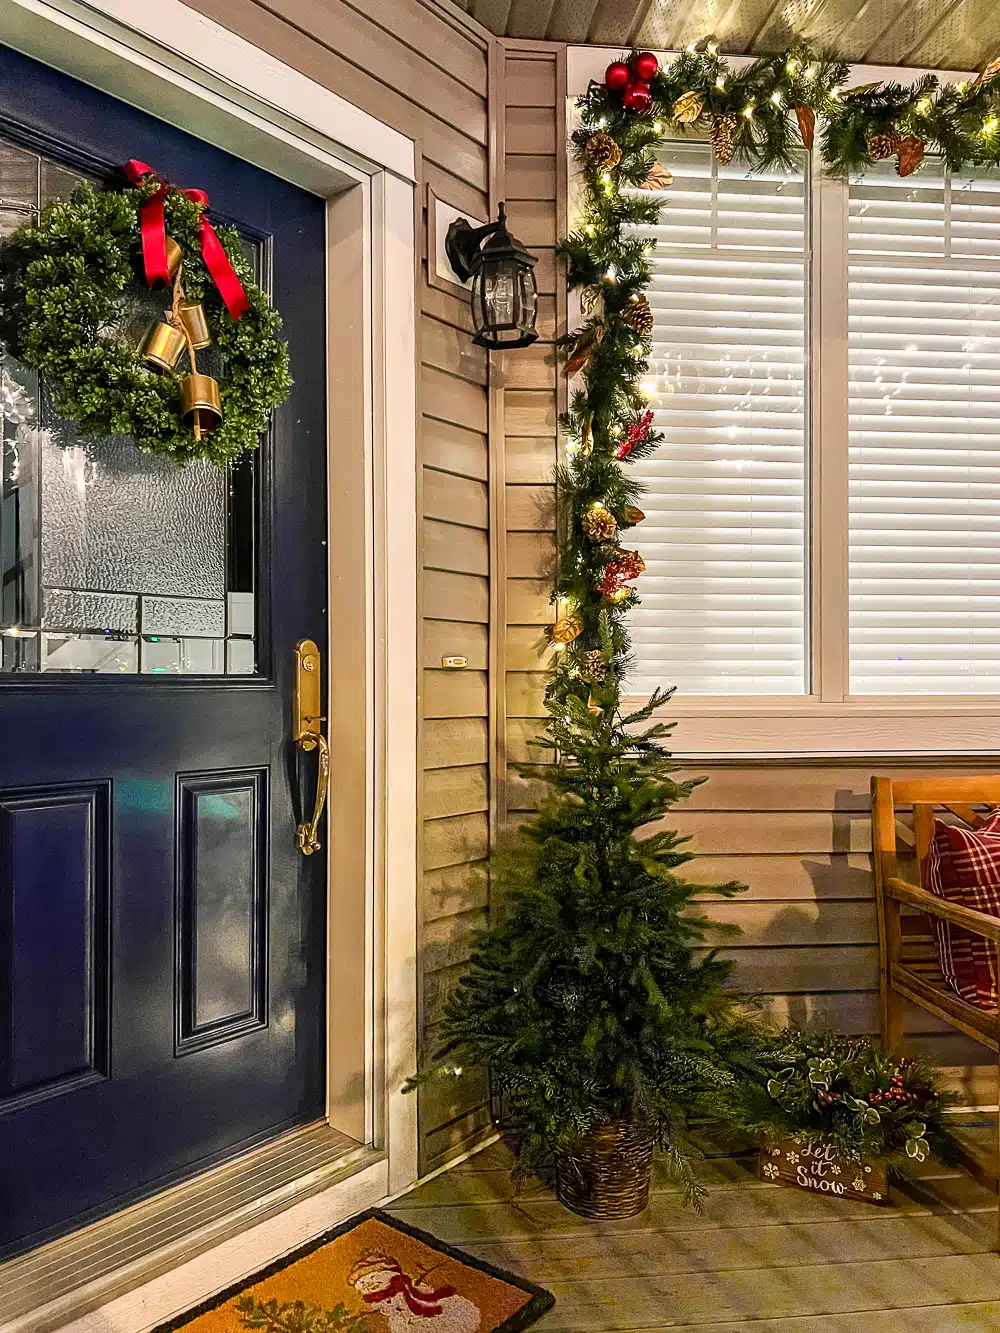 The festive porch decorate for Christmas